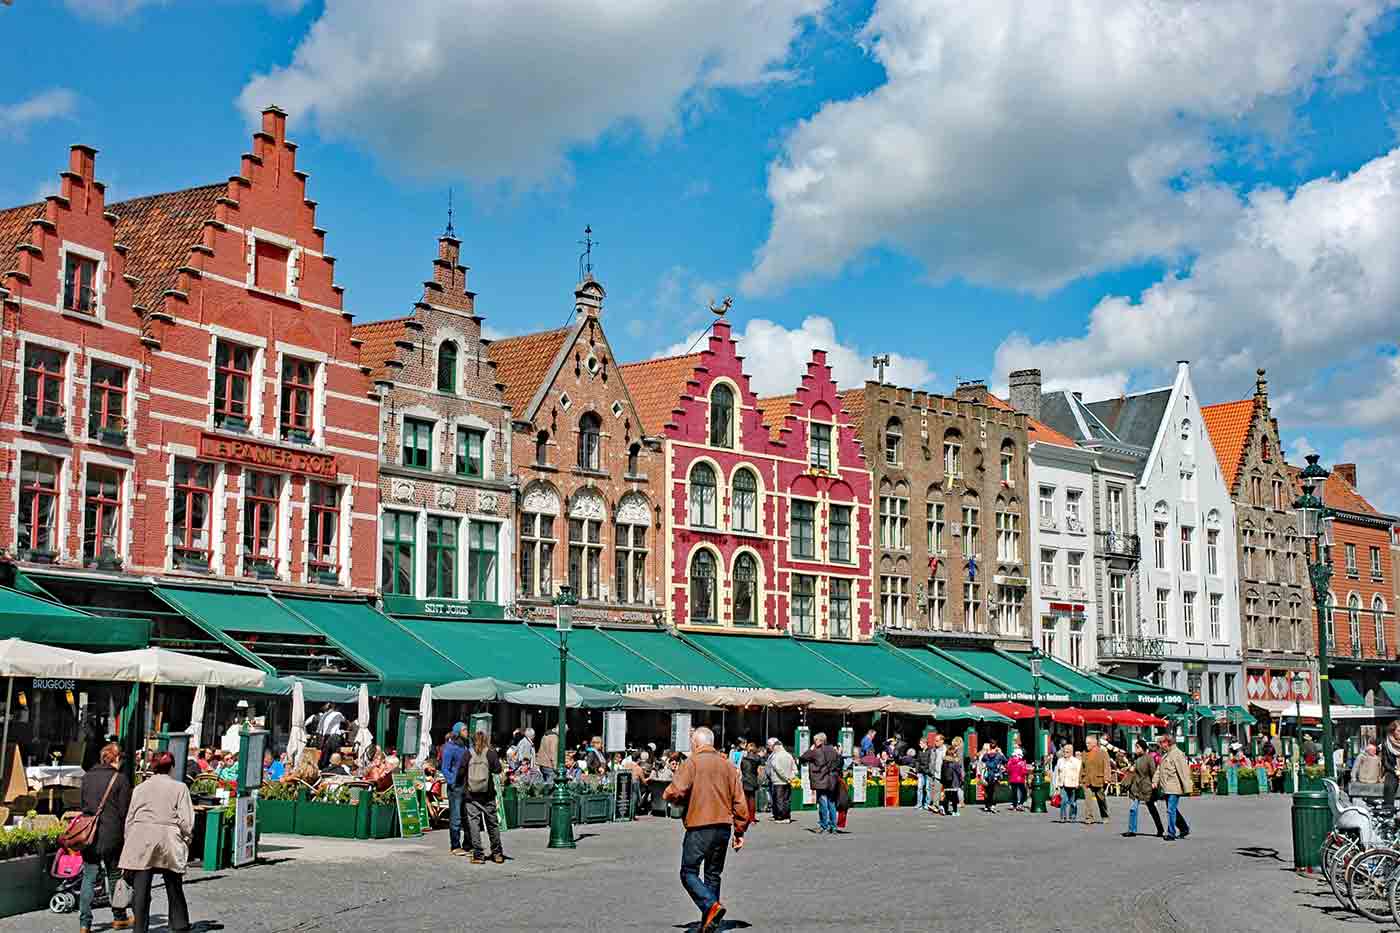 10 Top-Rated Attractions & Things To Do in Bruges, Belgium